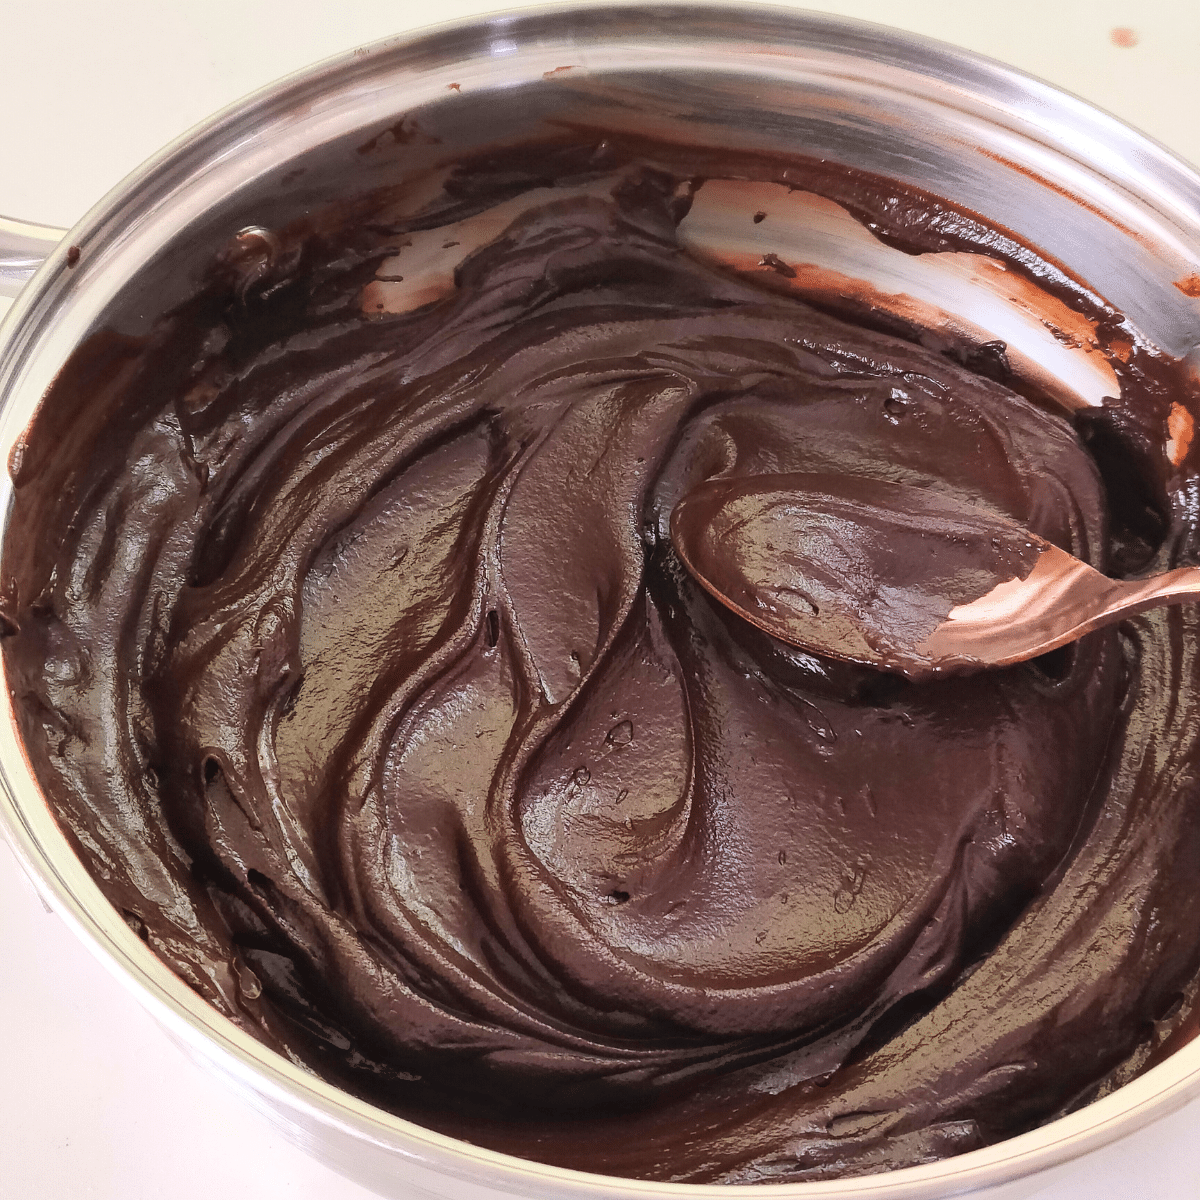 Mix to form frosting